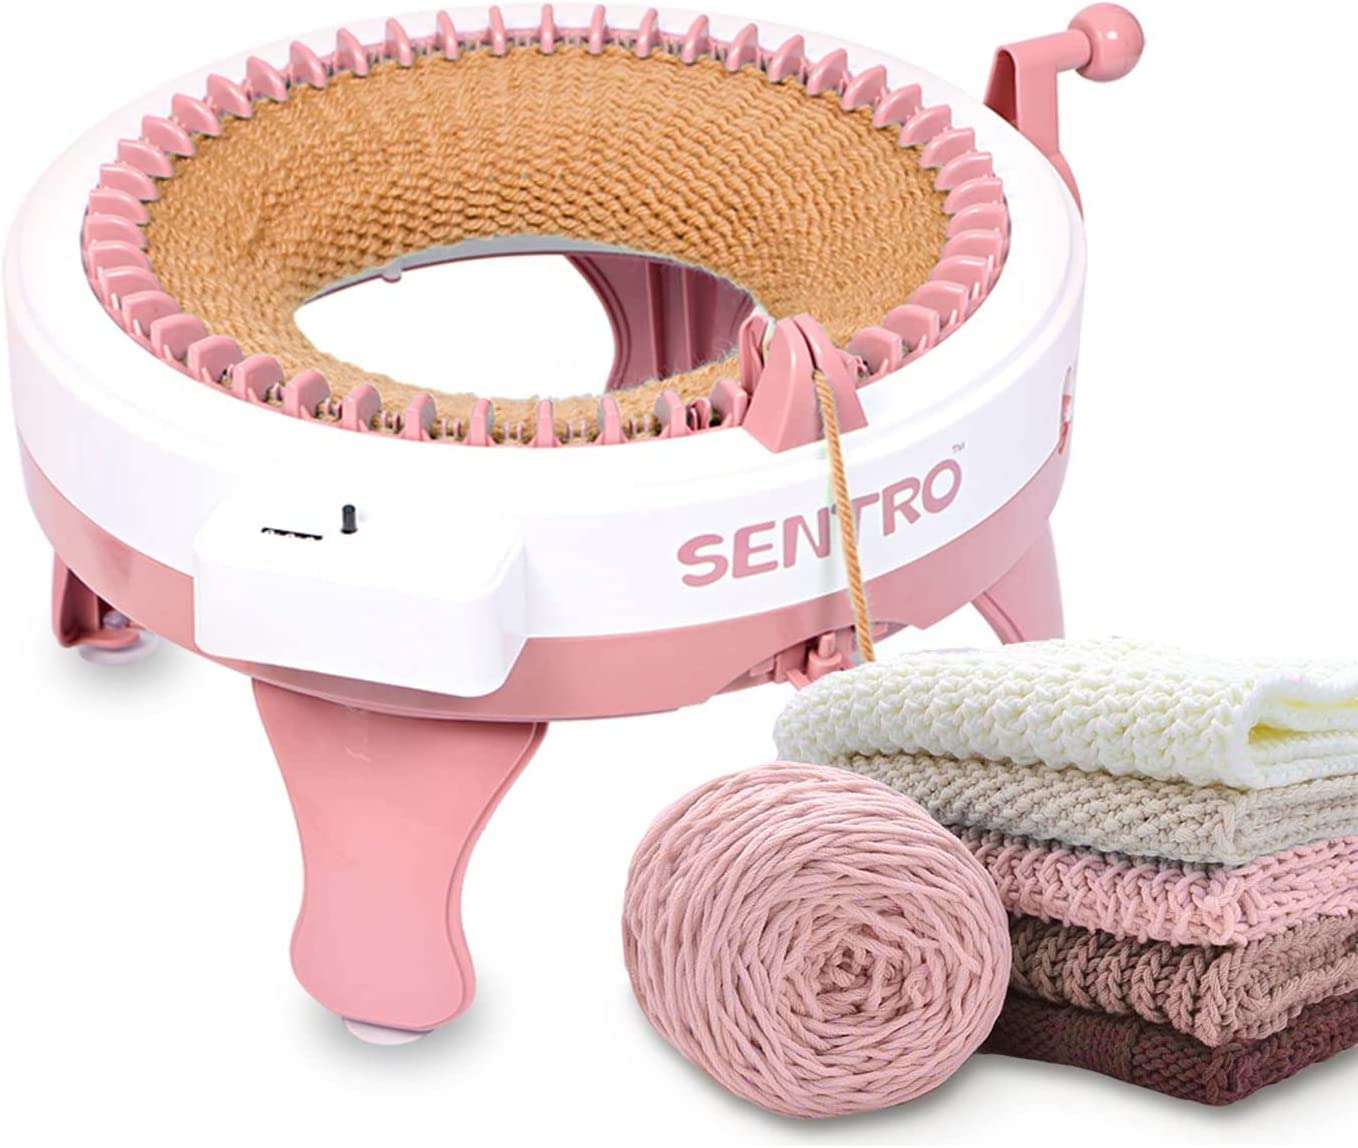 Demystifying Knitting Machines - Knitter's Review